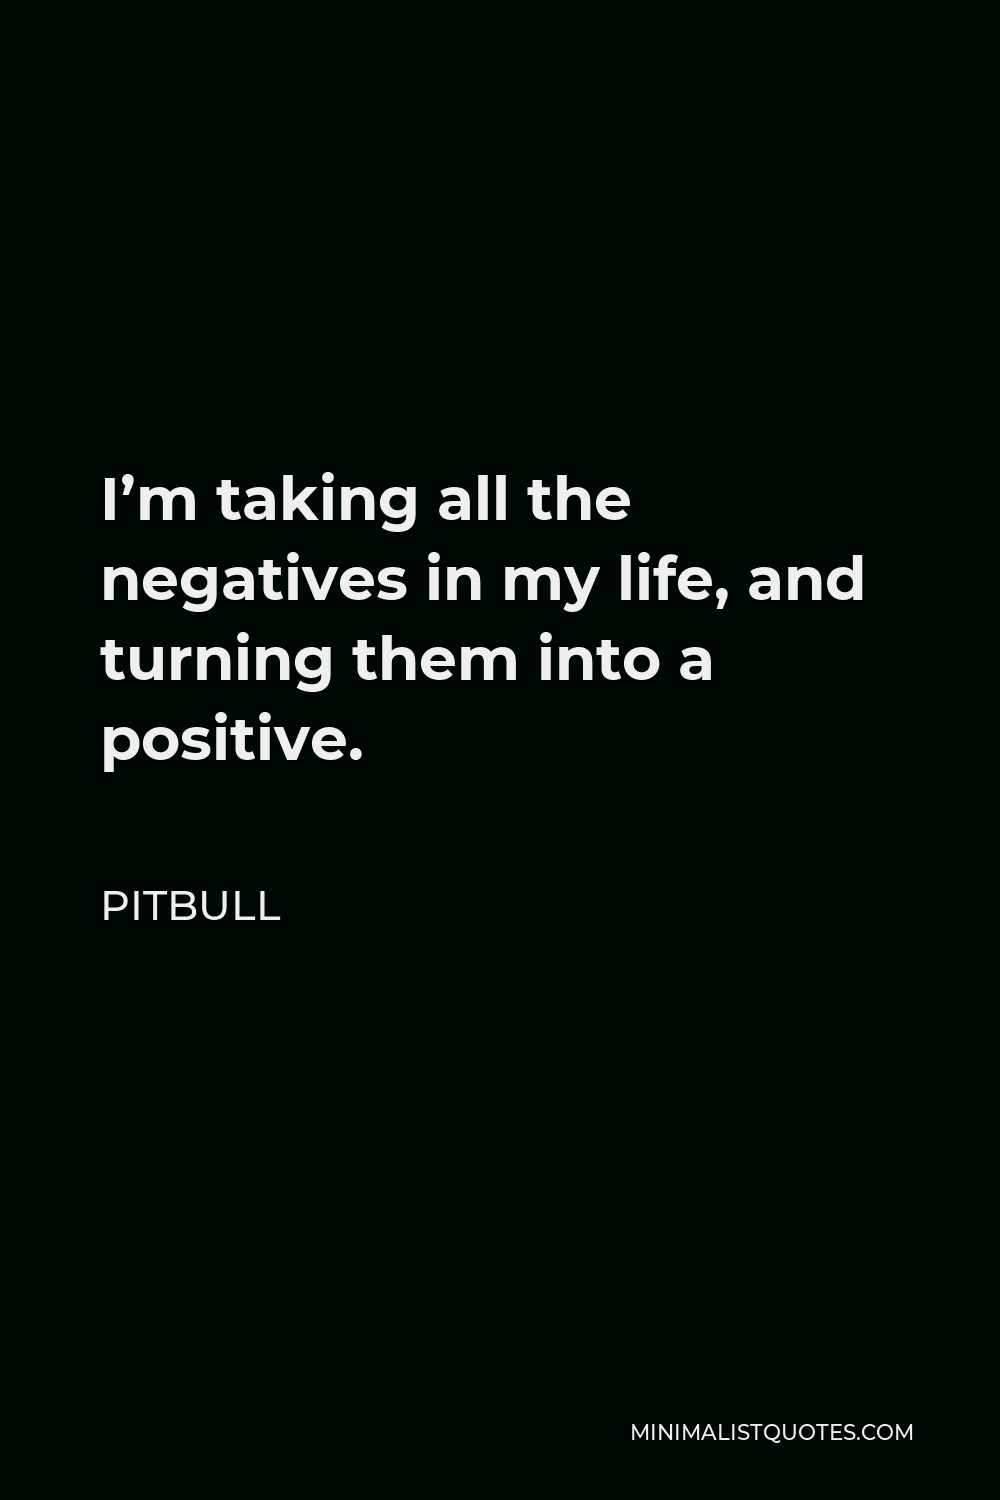 Pitbull Quote - I’m taking all the negatives in my life, and turning them into a positive.